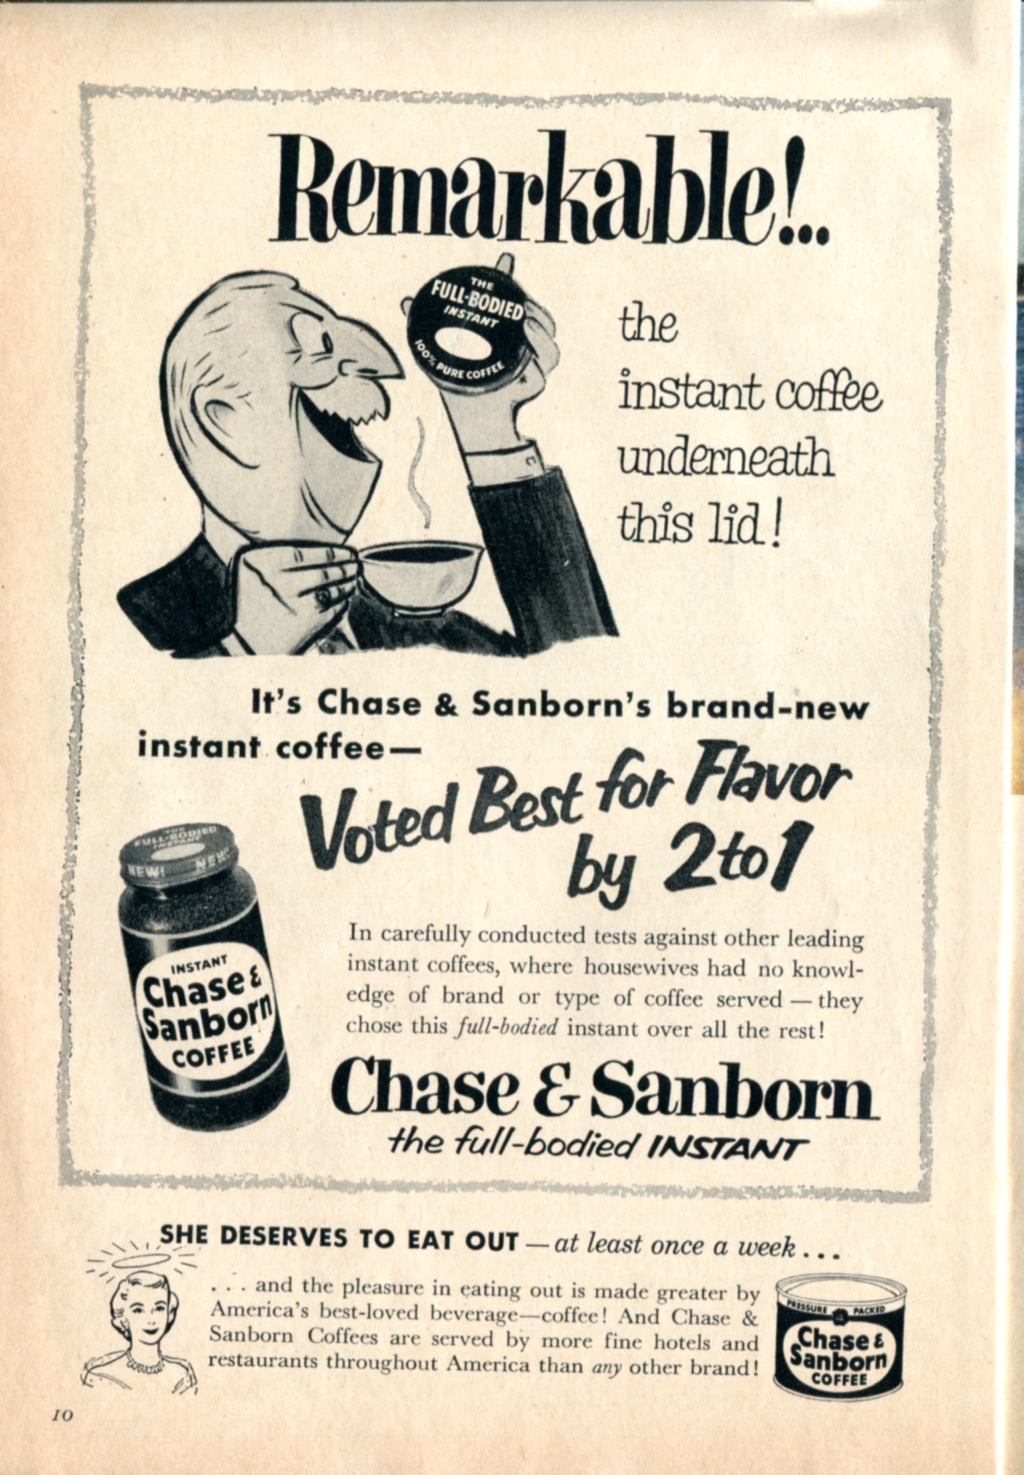 an old advertit for a flavored coffee company